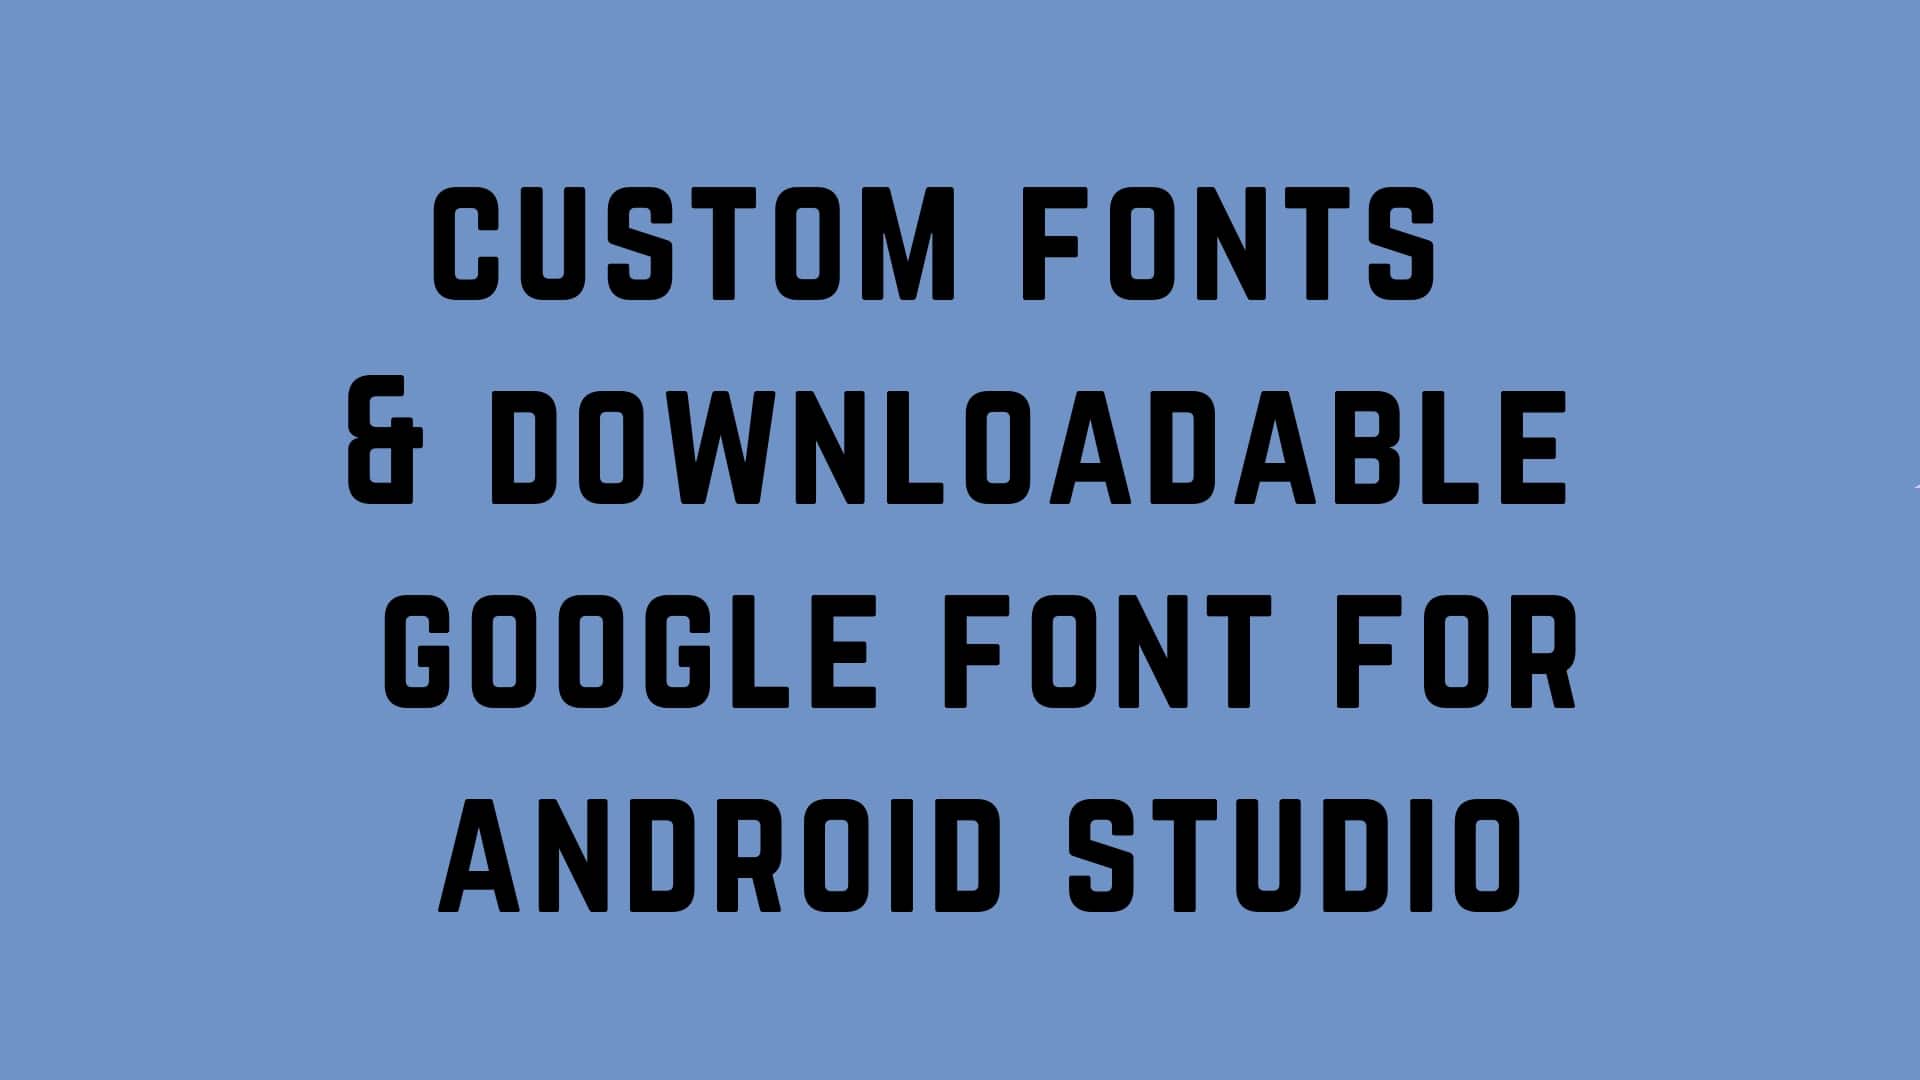 Use custom fonts and downloadable google font for android studio